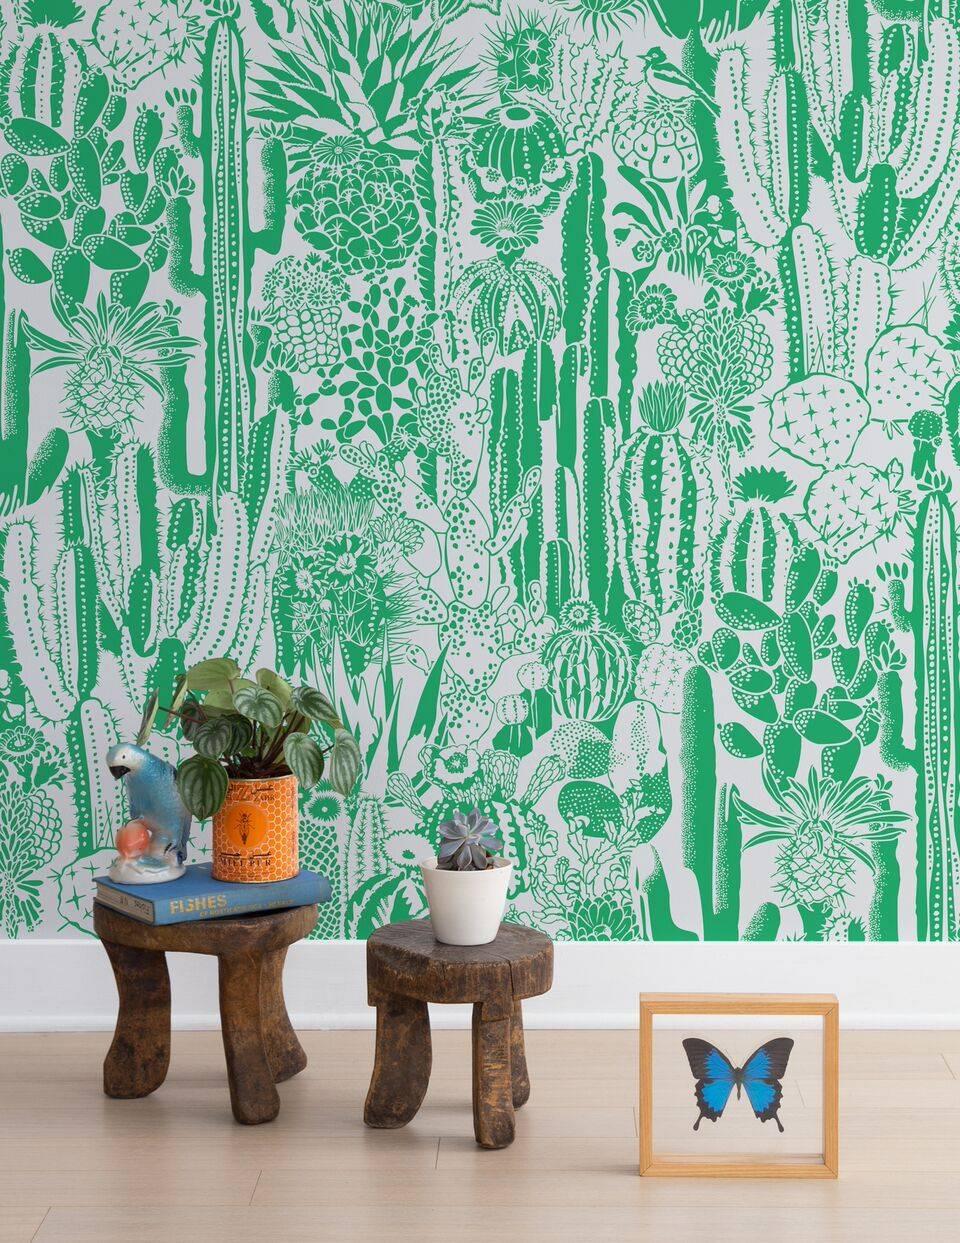 Give your home a taste of the Southwest with this graphic, oversized cactus repeat! This pattern combines saguaros, aloe, agave, peyote, prickly pear, San Pedros and more, the perfect way to bring the desert into your home without getting